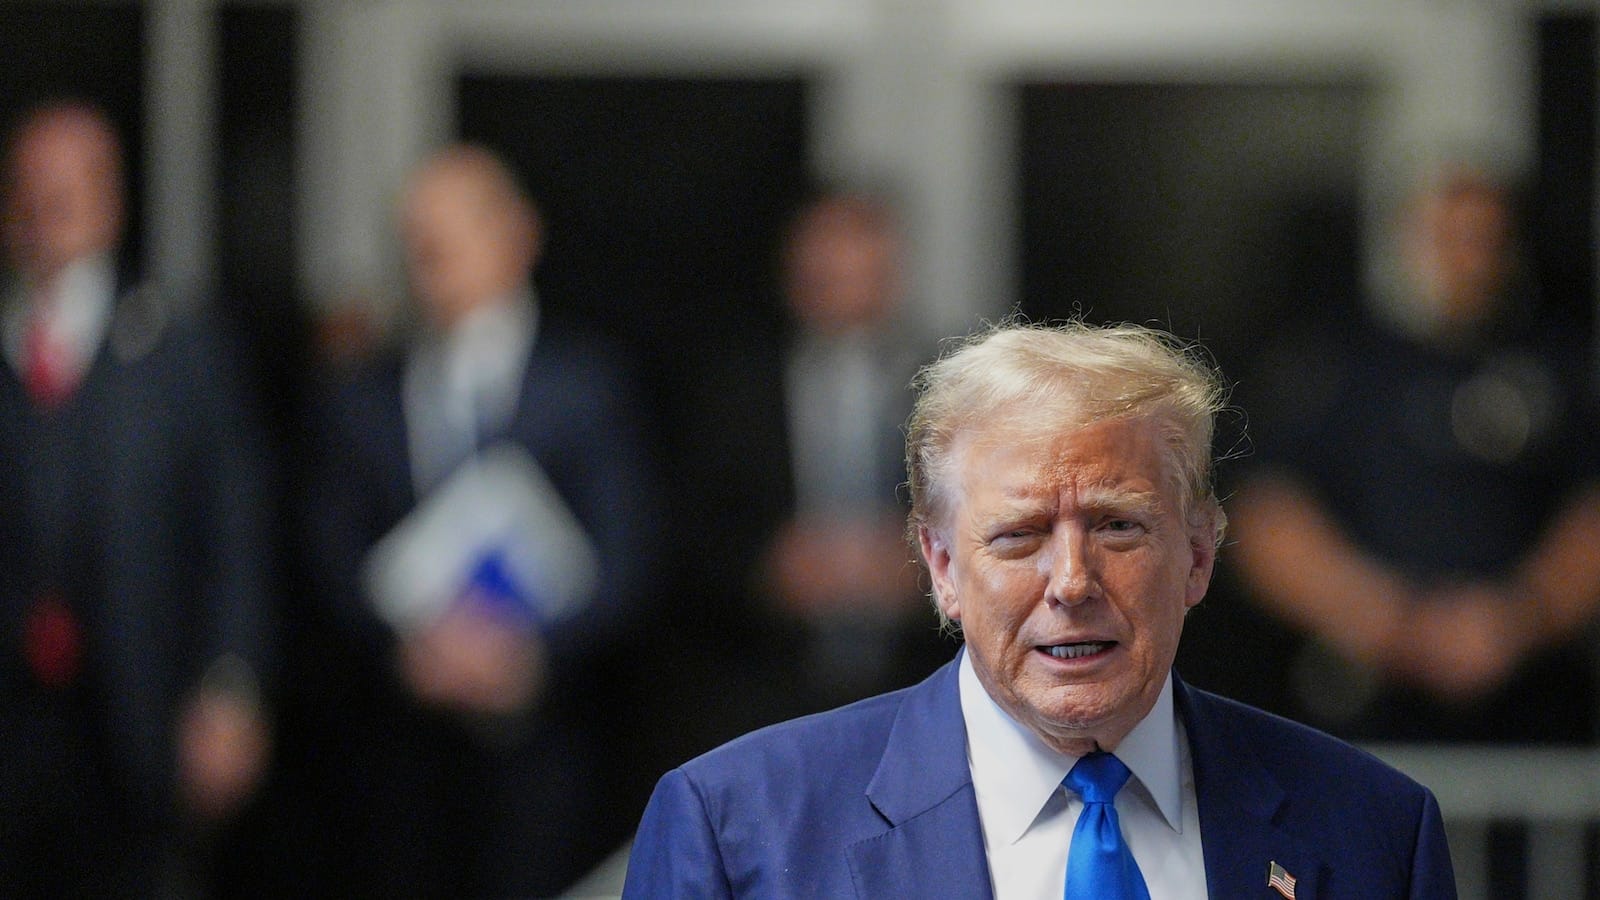 Trump says Biden is running a ‘Gestapo’ administration. It’s his latest reference to Nazi Germany